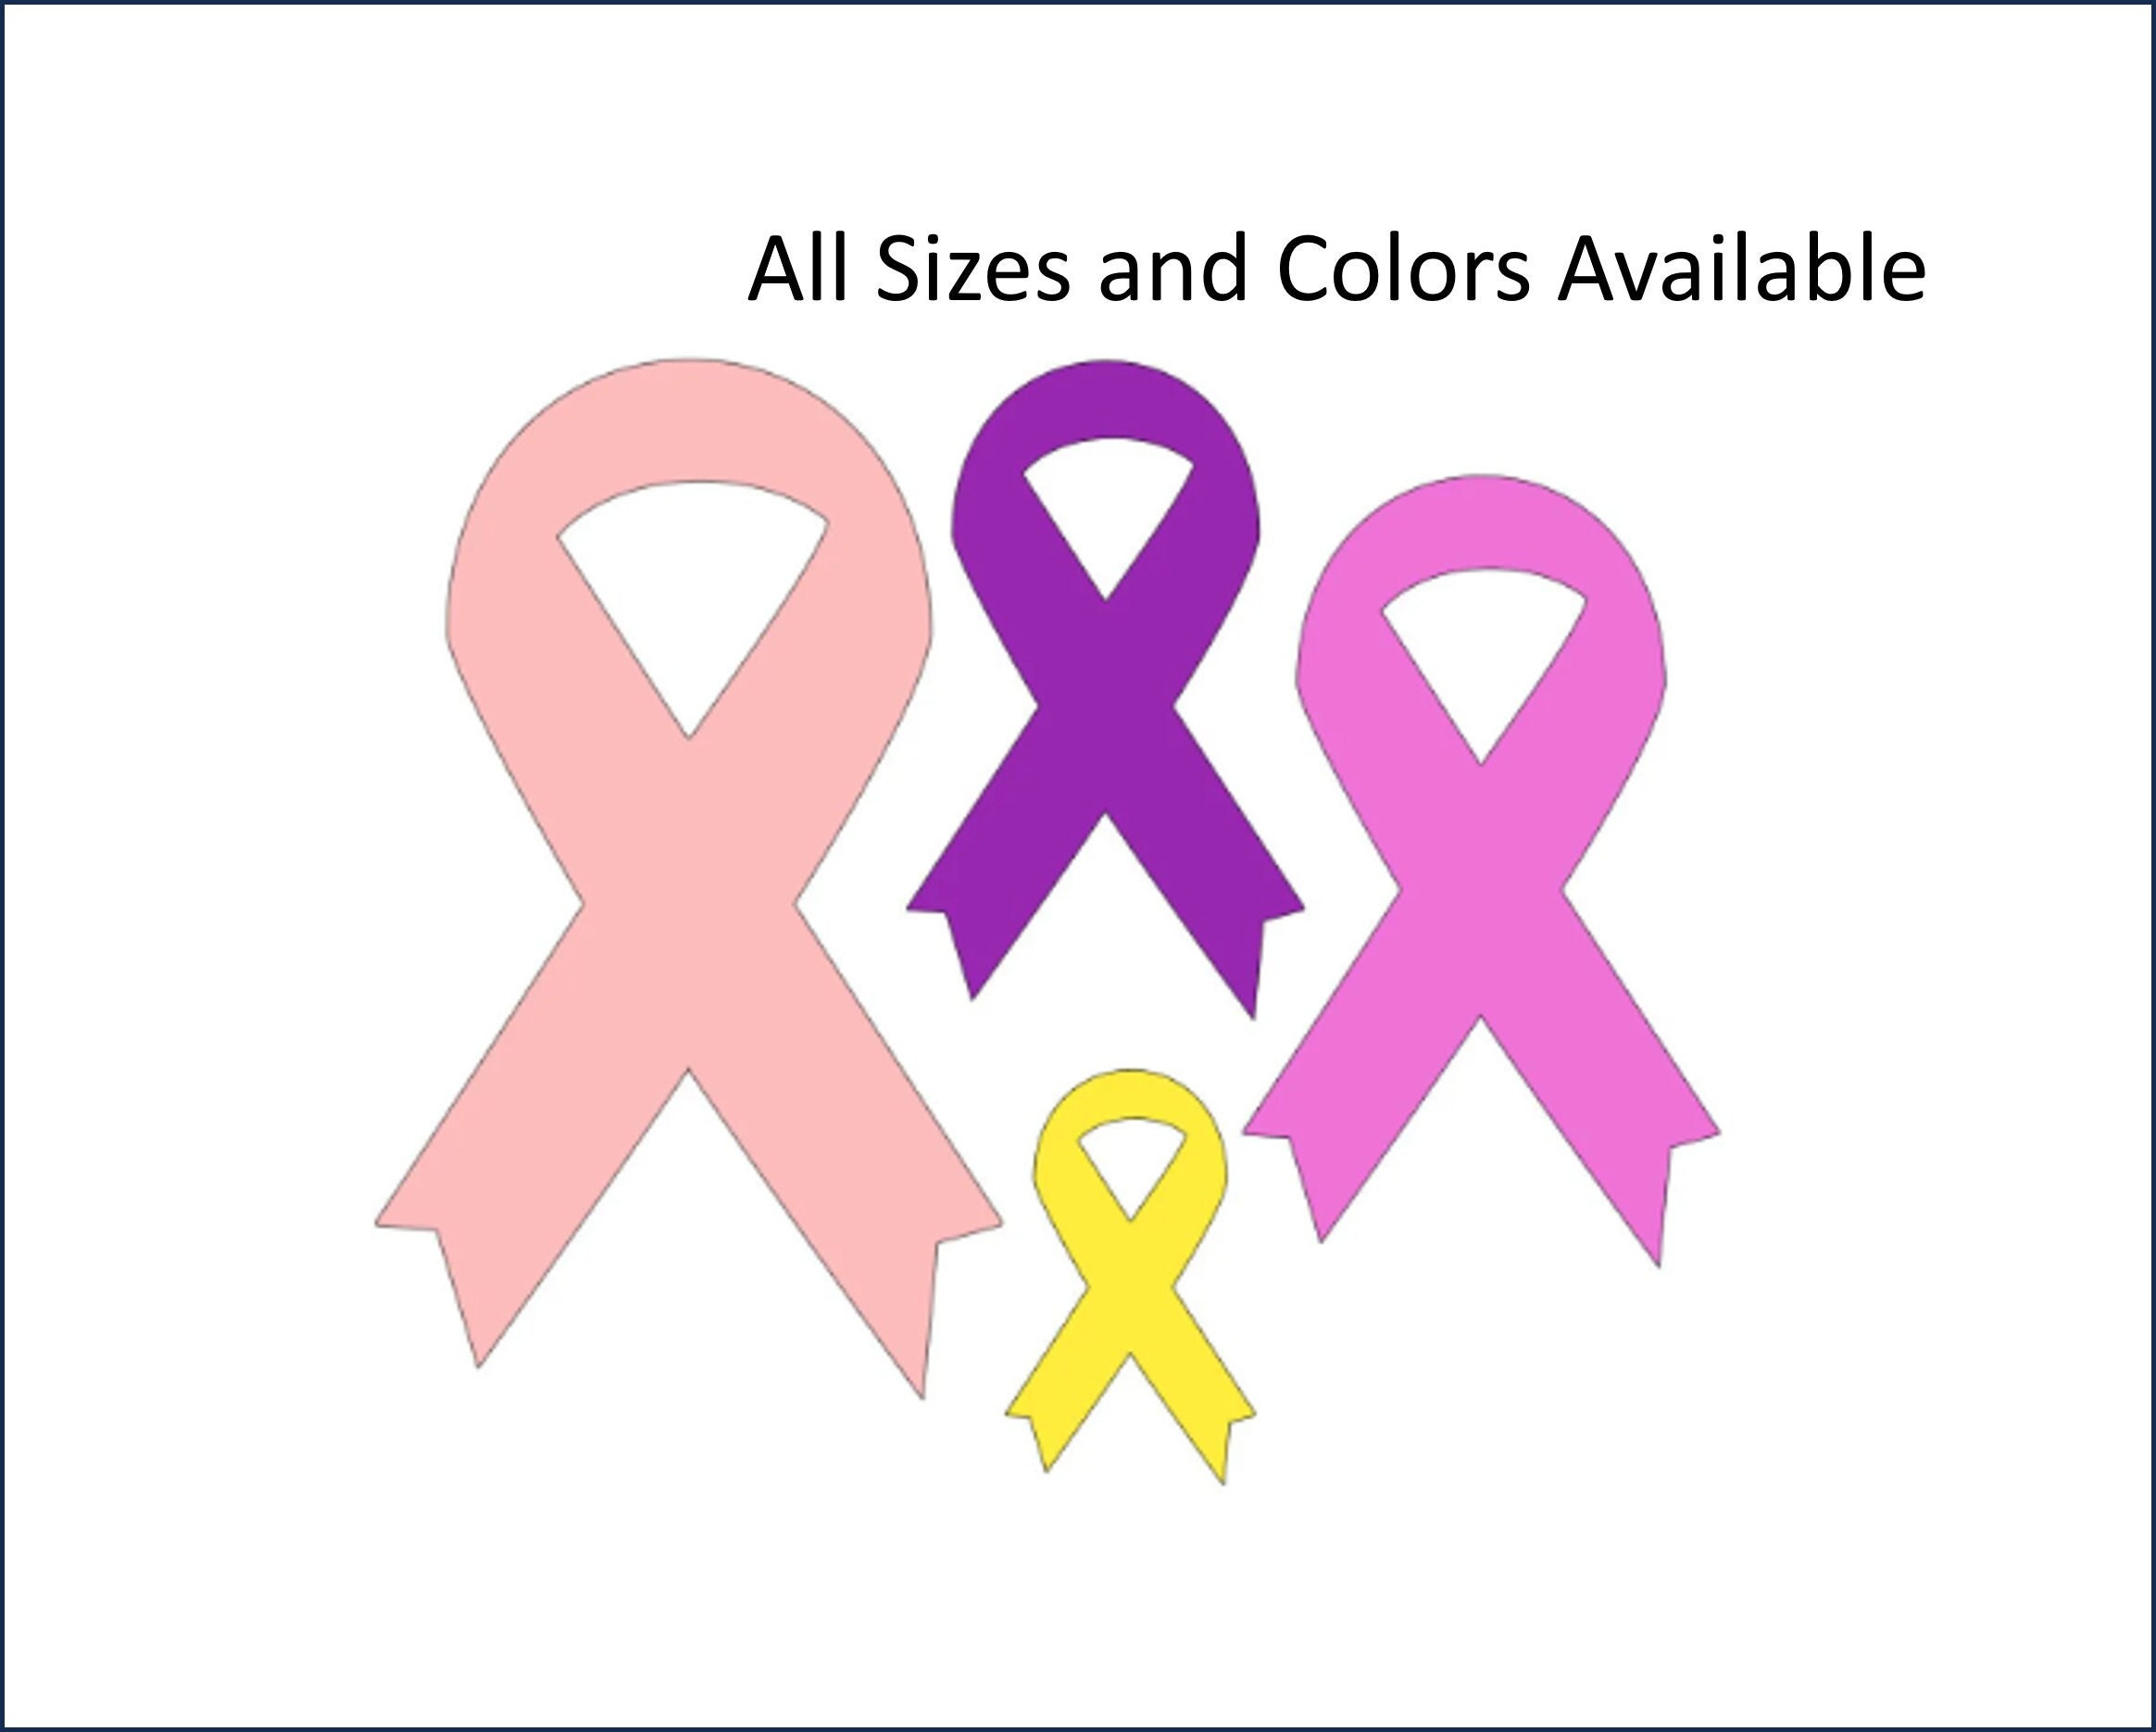 Every Awareness Ribbon Color and Their Meanings